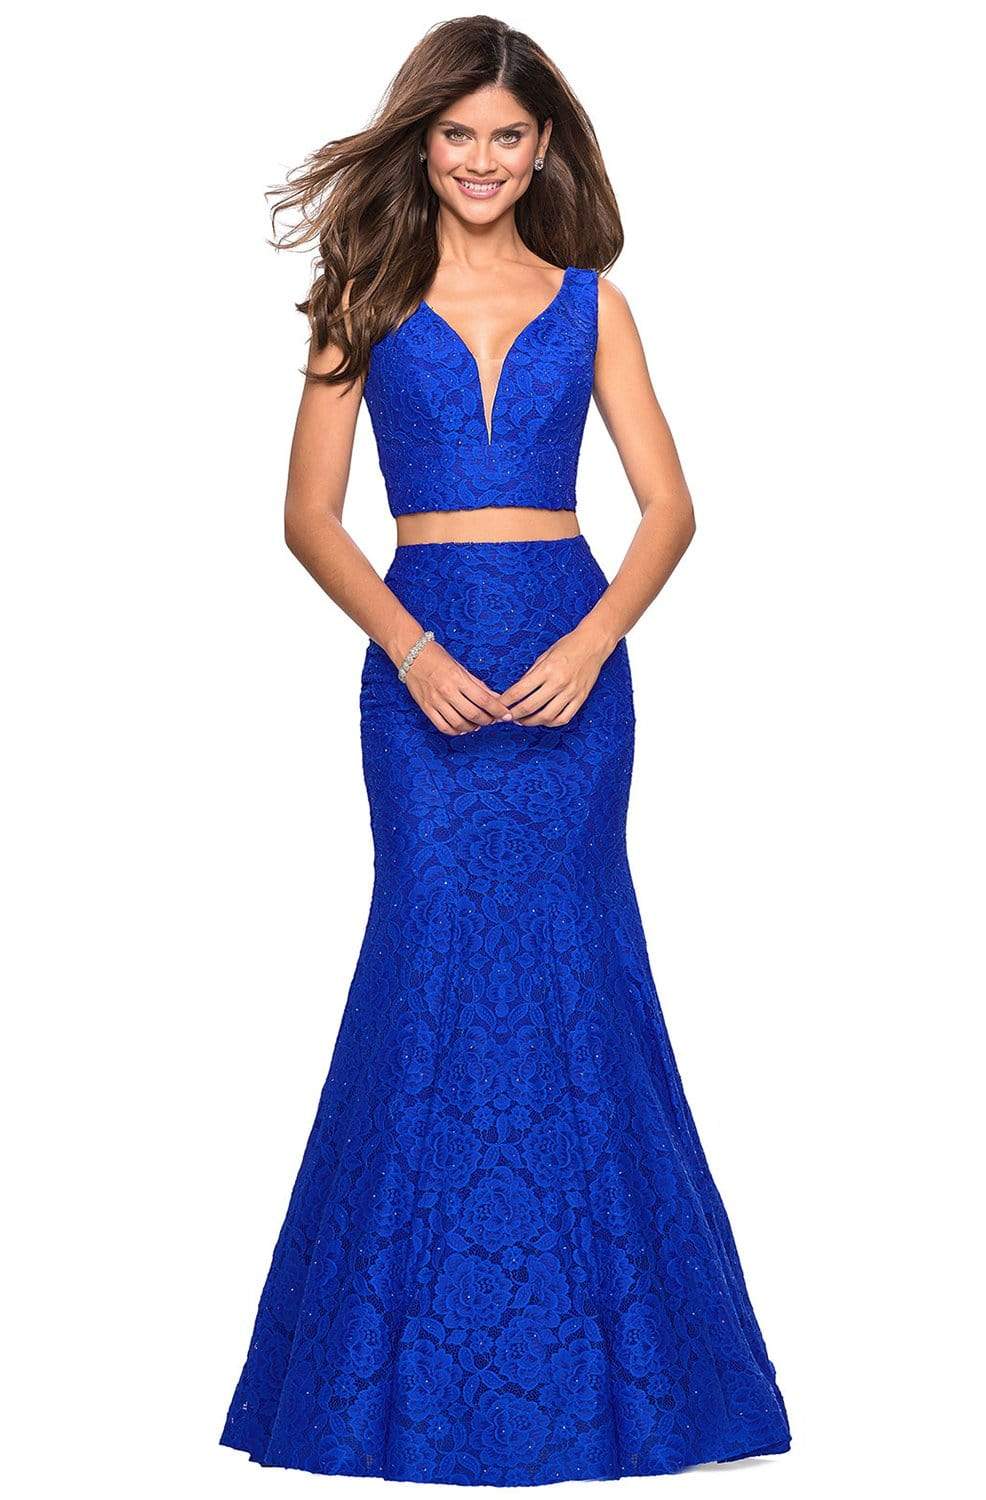 La Femme - 27262 Allover Lace Sleeveless V Neck Two-Piece Mermaid Gown Evening Dresses 00 / Electric Blue